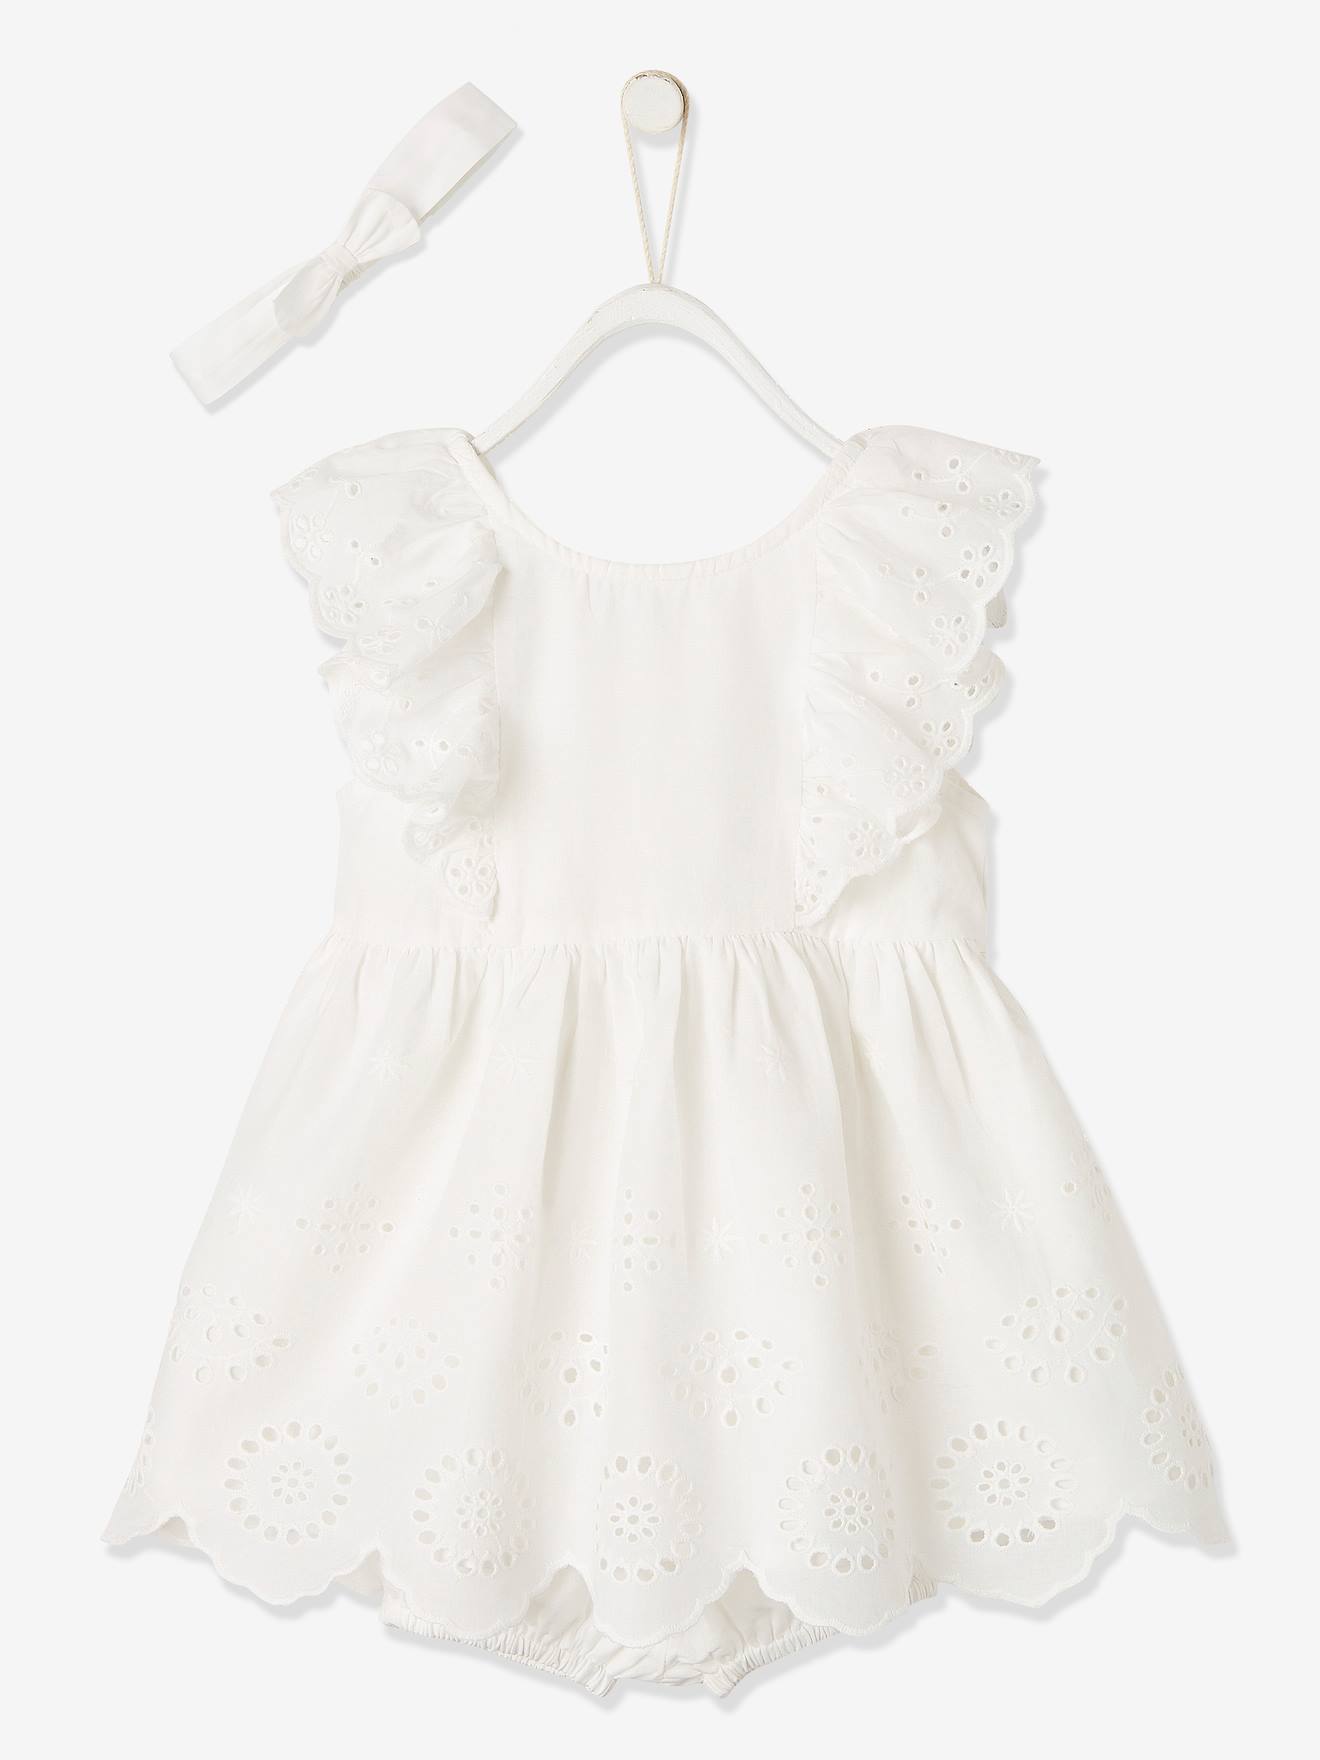 Occasion Wear Outfit for Babies: Dress, Bloomer Shorts & Hairband white